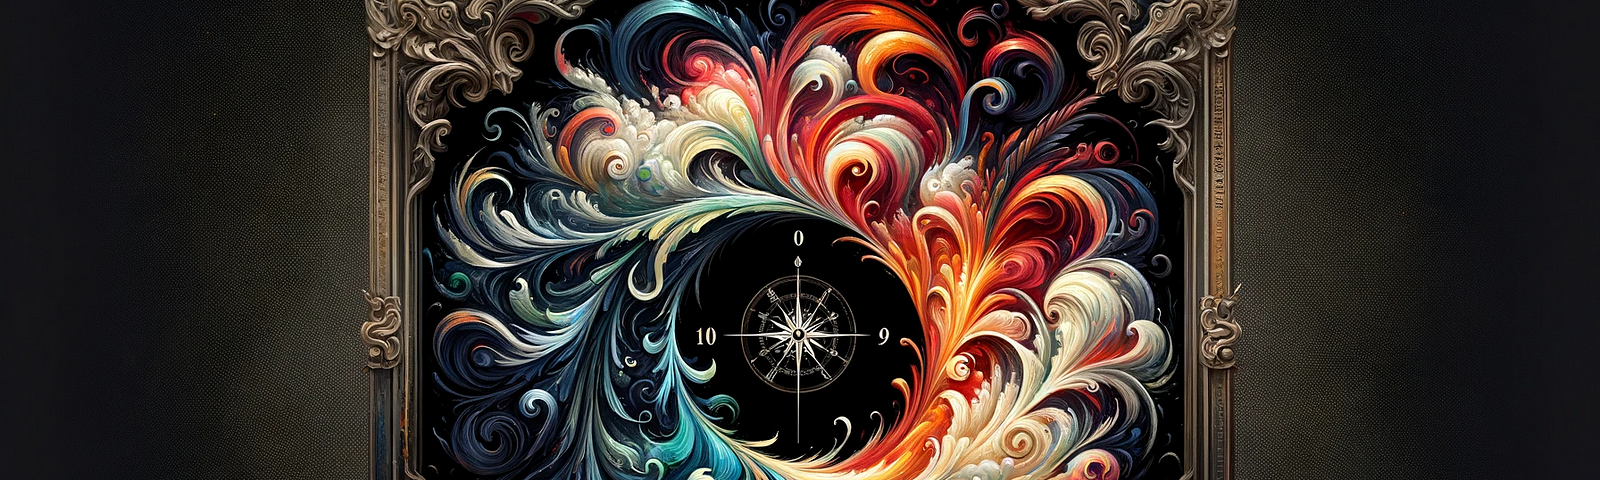 Abstract image showing a 10/90 split. On the left, a chaotic swirl of dark colors represents life’s 10% uncertainty. The right 90% features bright, harmonious colors symbolizing positive reactions and growth. A subtle compass integrates into the design, indicating navigation through life’s challenges.